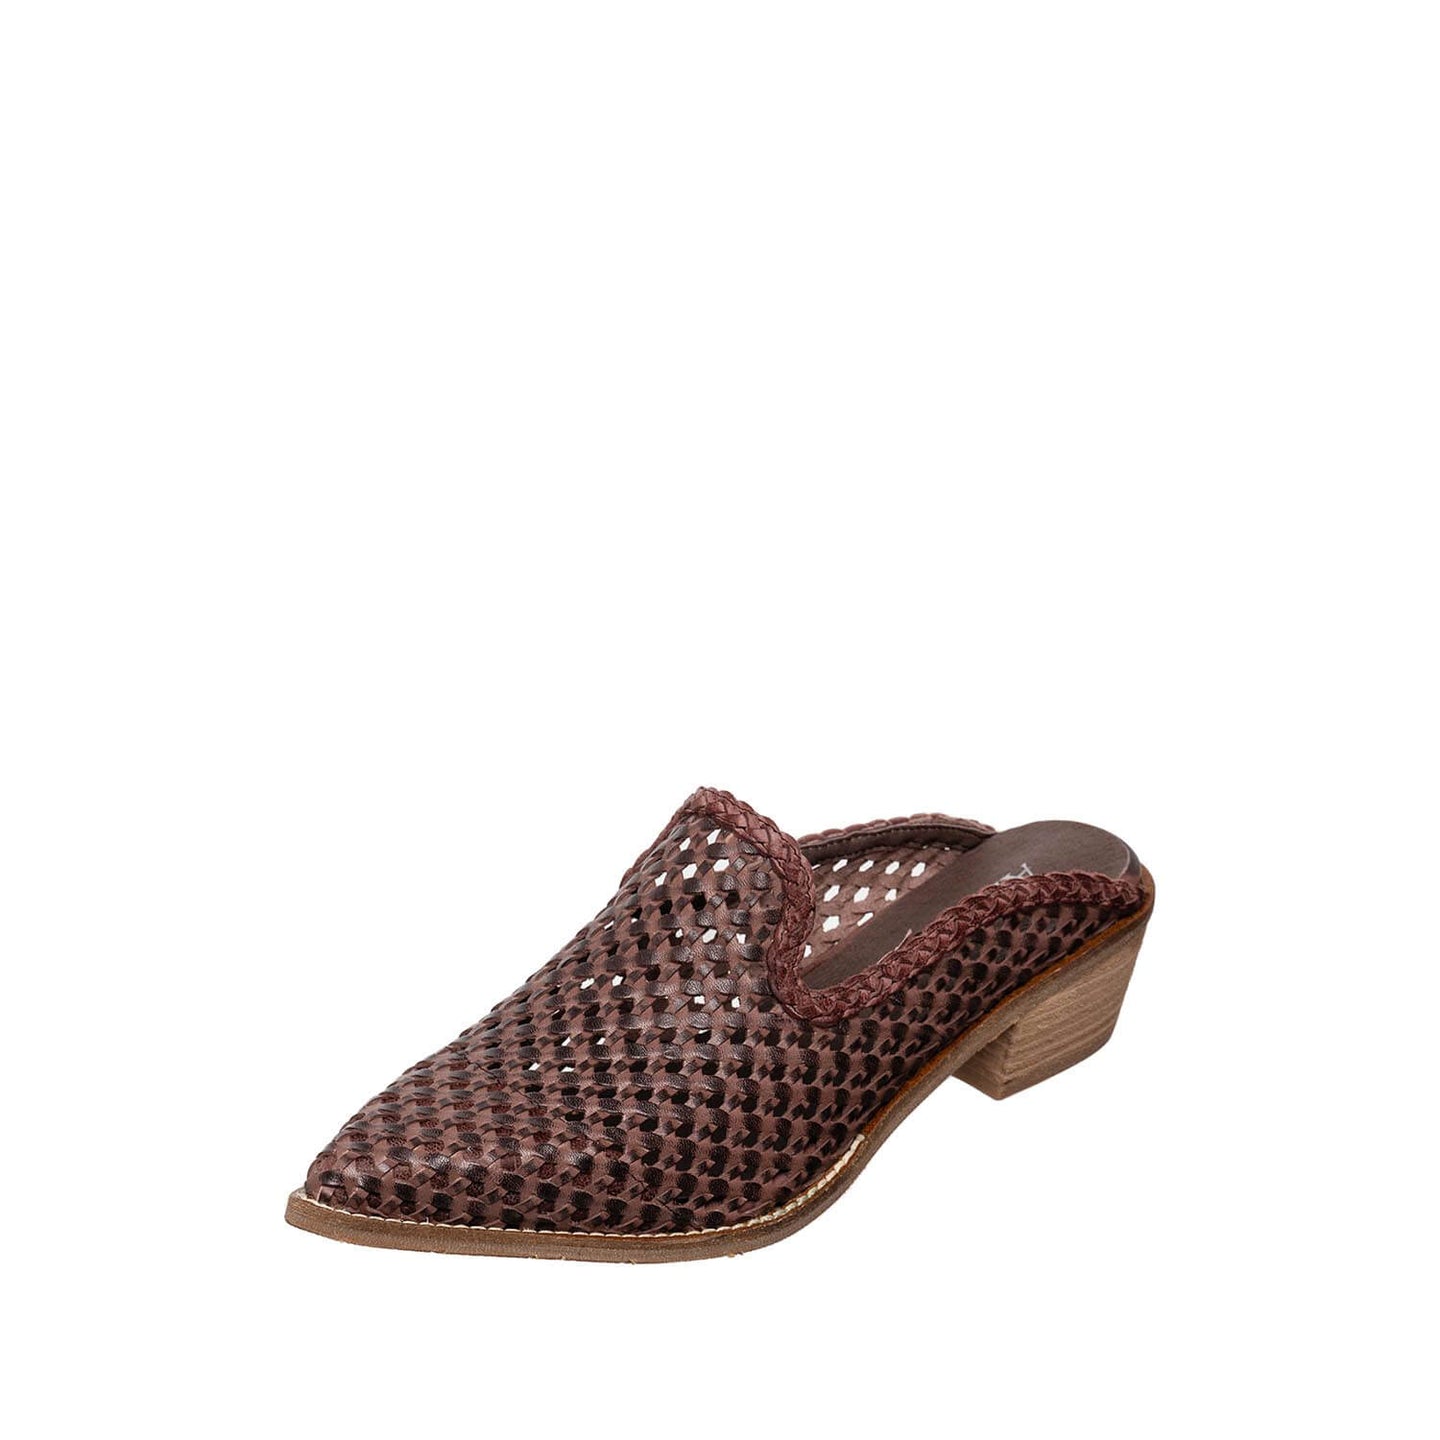 M35 Dellyn Leather Western Style Mules for Women in Chocolate